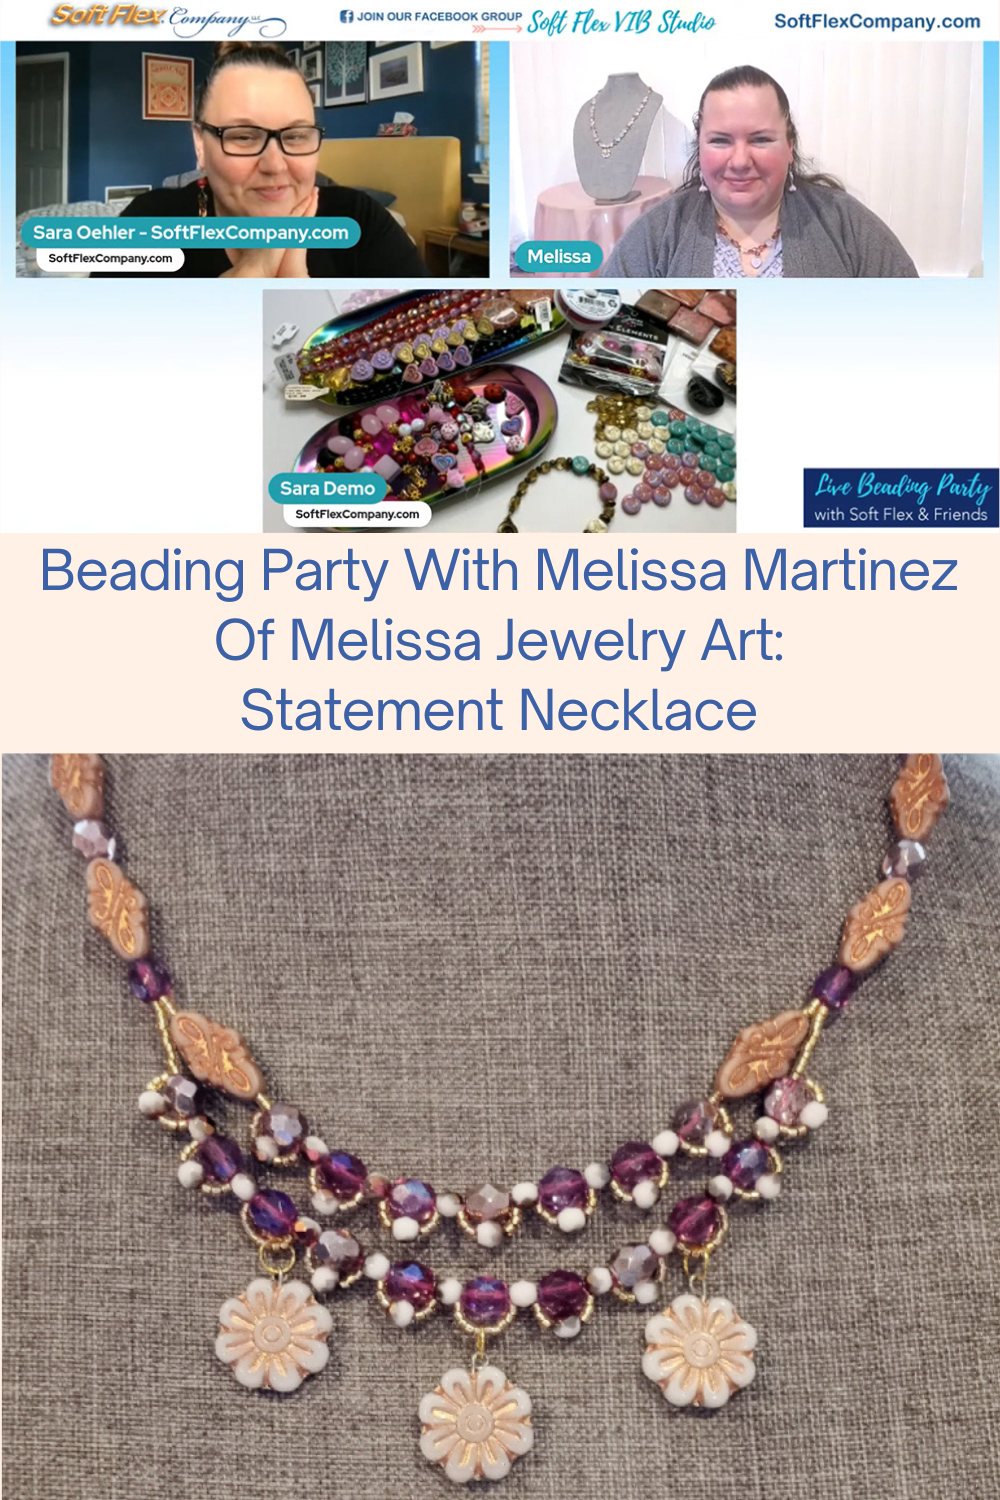 Beading Party With Melissa Martinez Of Melissa Jewelry Art Statement Necklace Collage